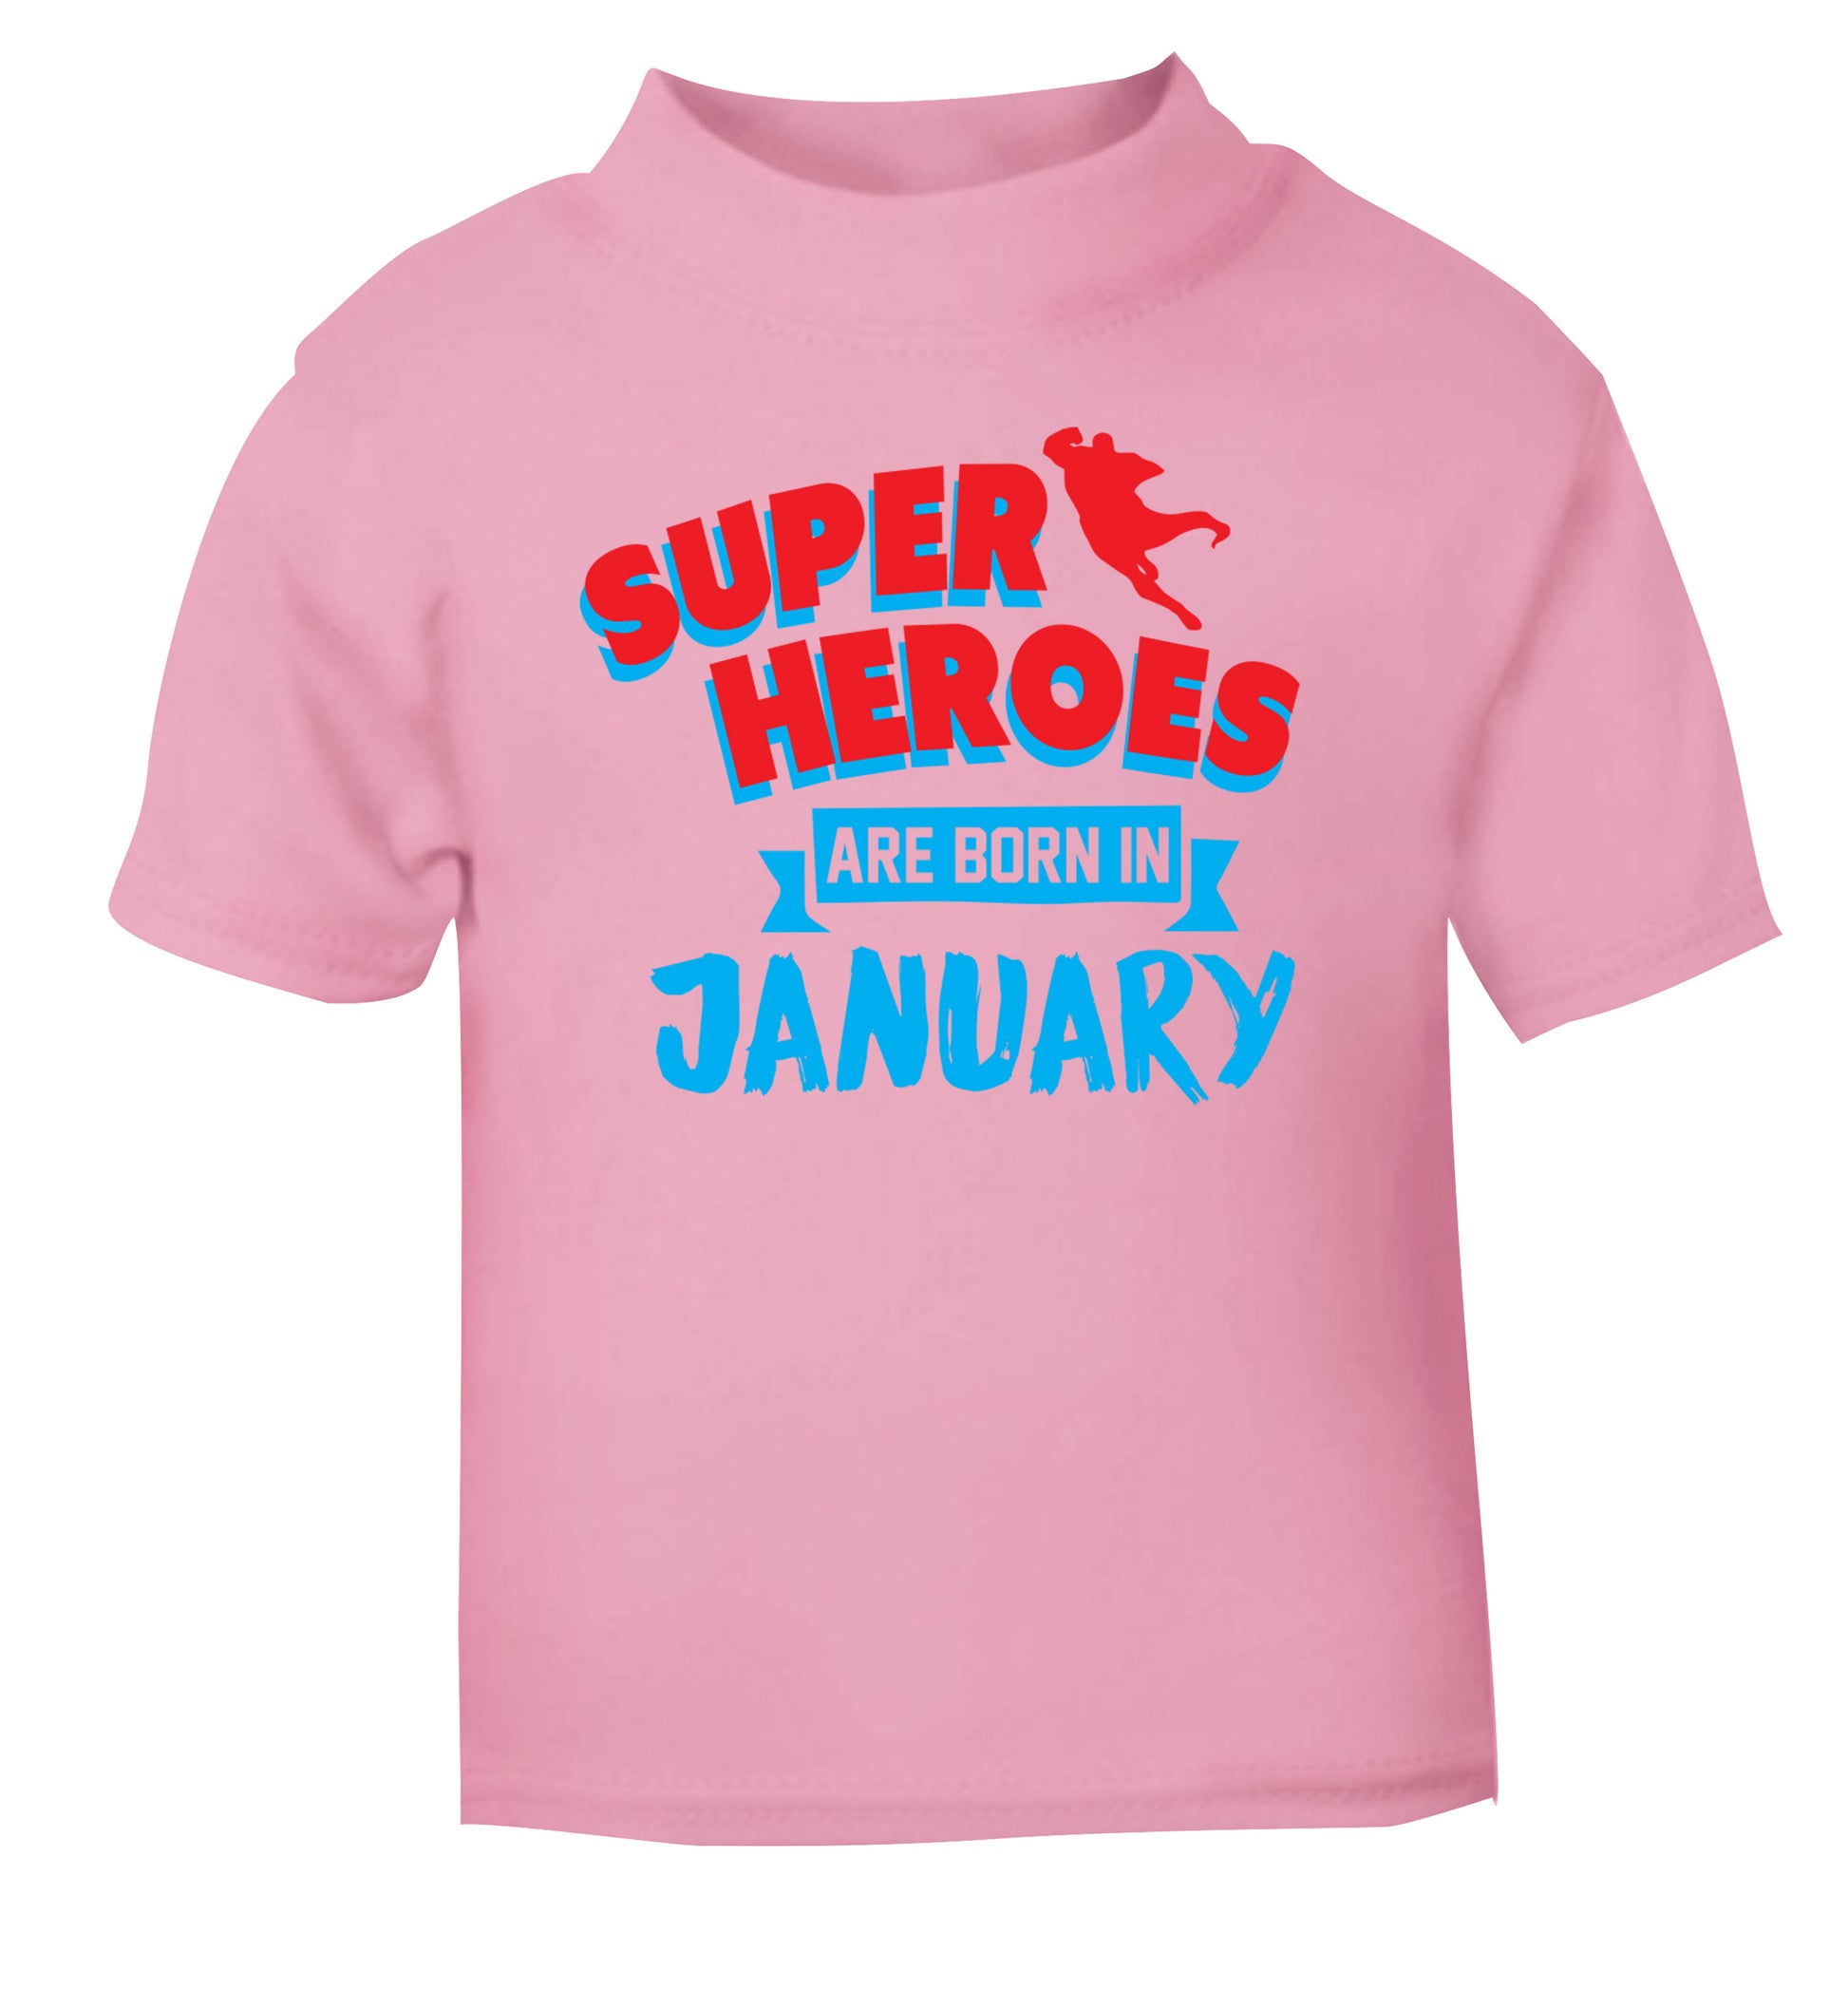 Superheros are born in January light pink Baby Toddler Tshirt 2 Years